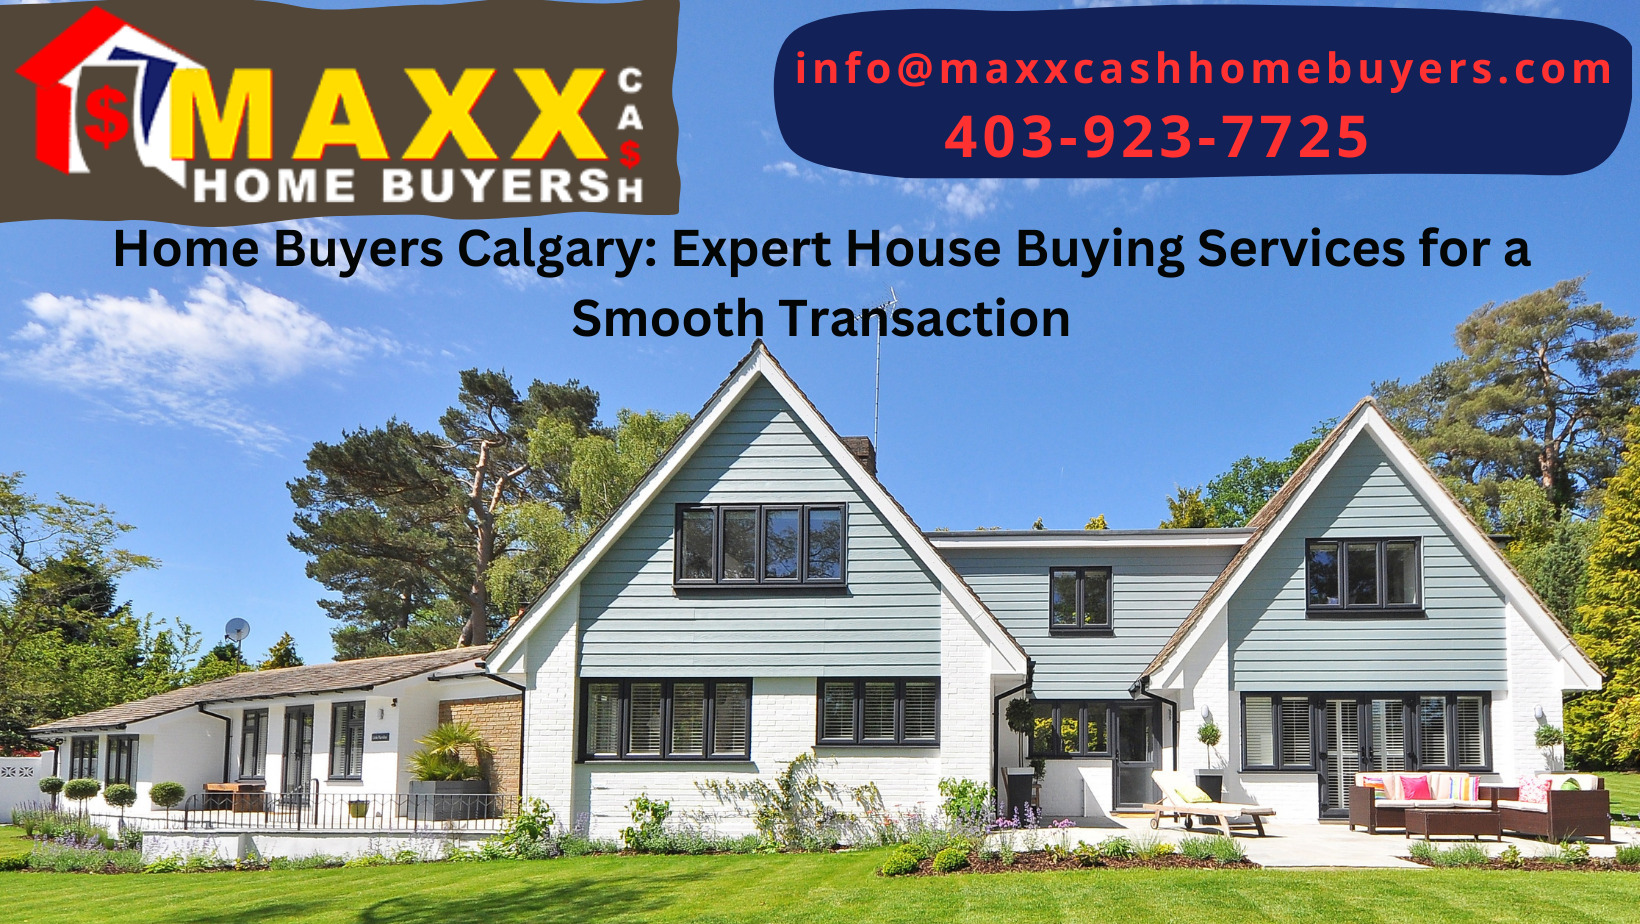 Home Buyers Calgary: Expert House Buying Services for a Smooth Transaction